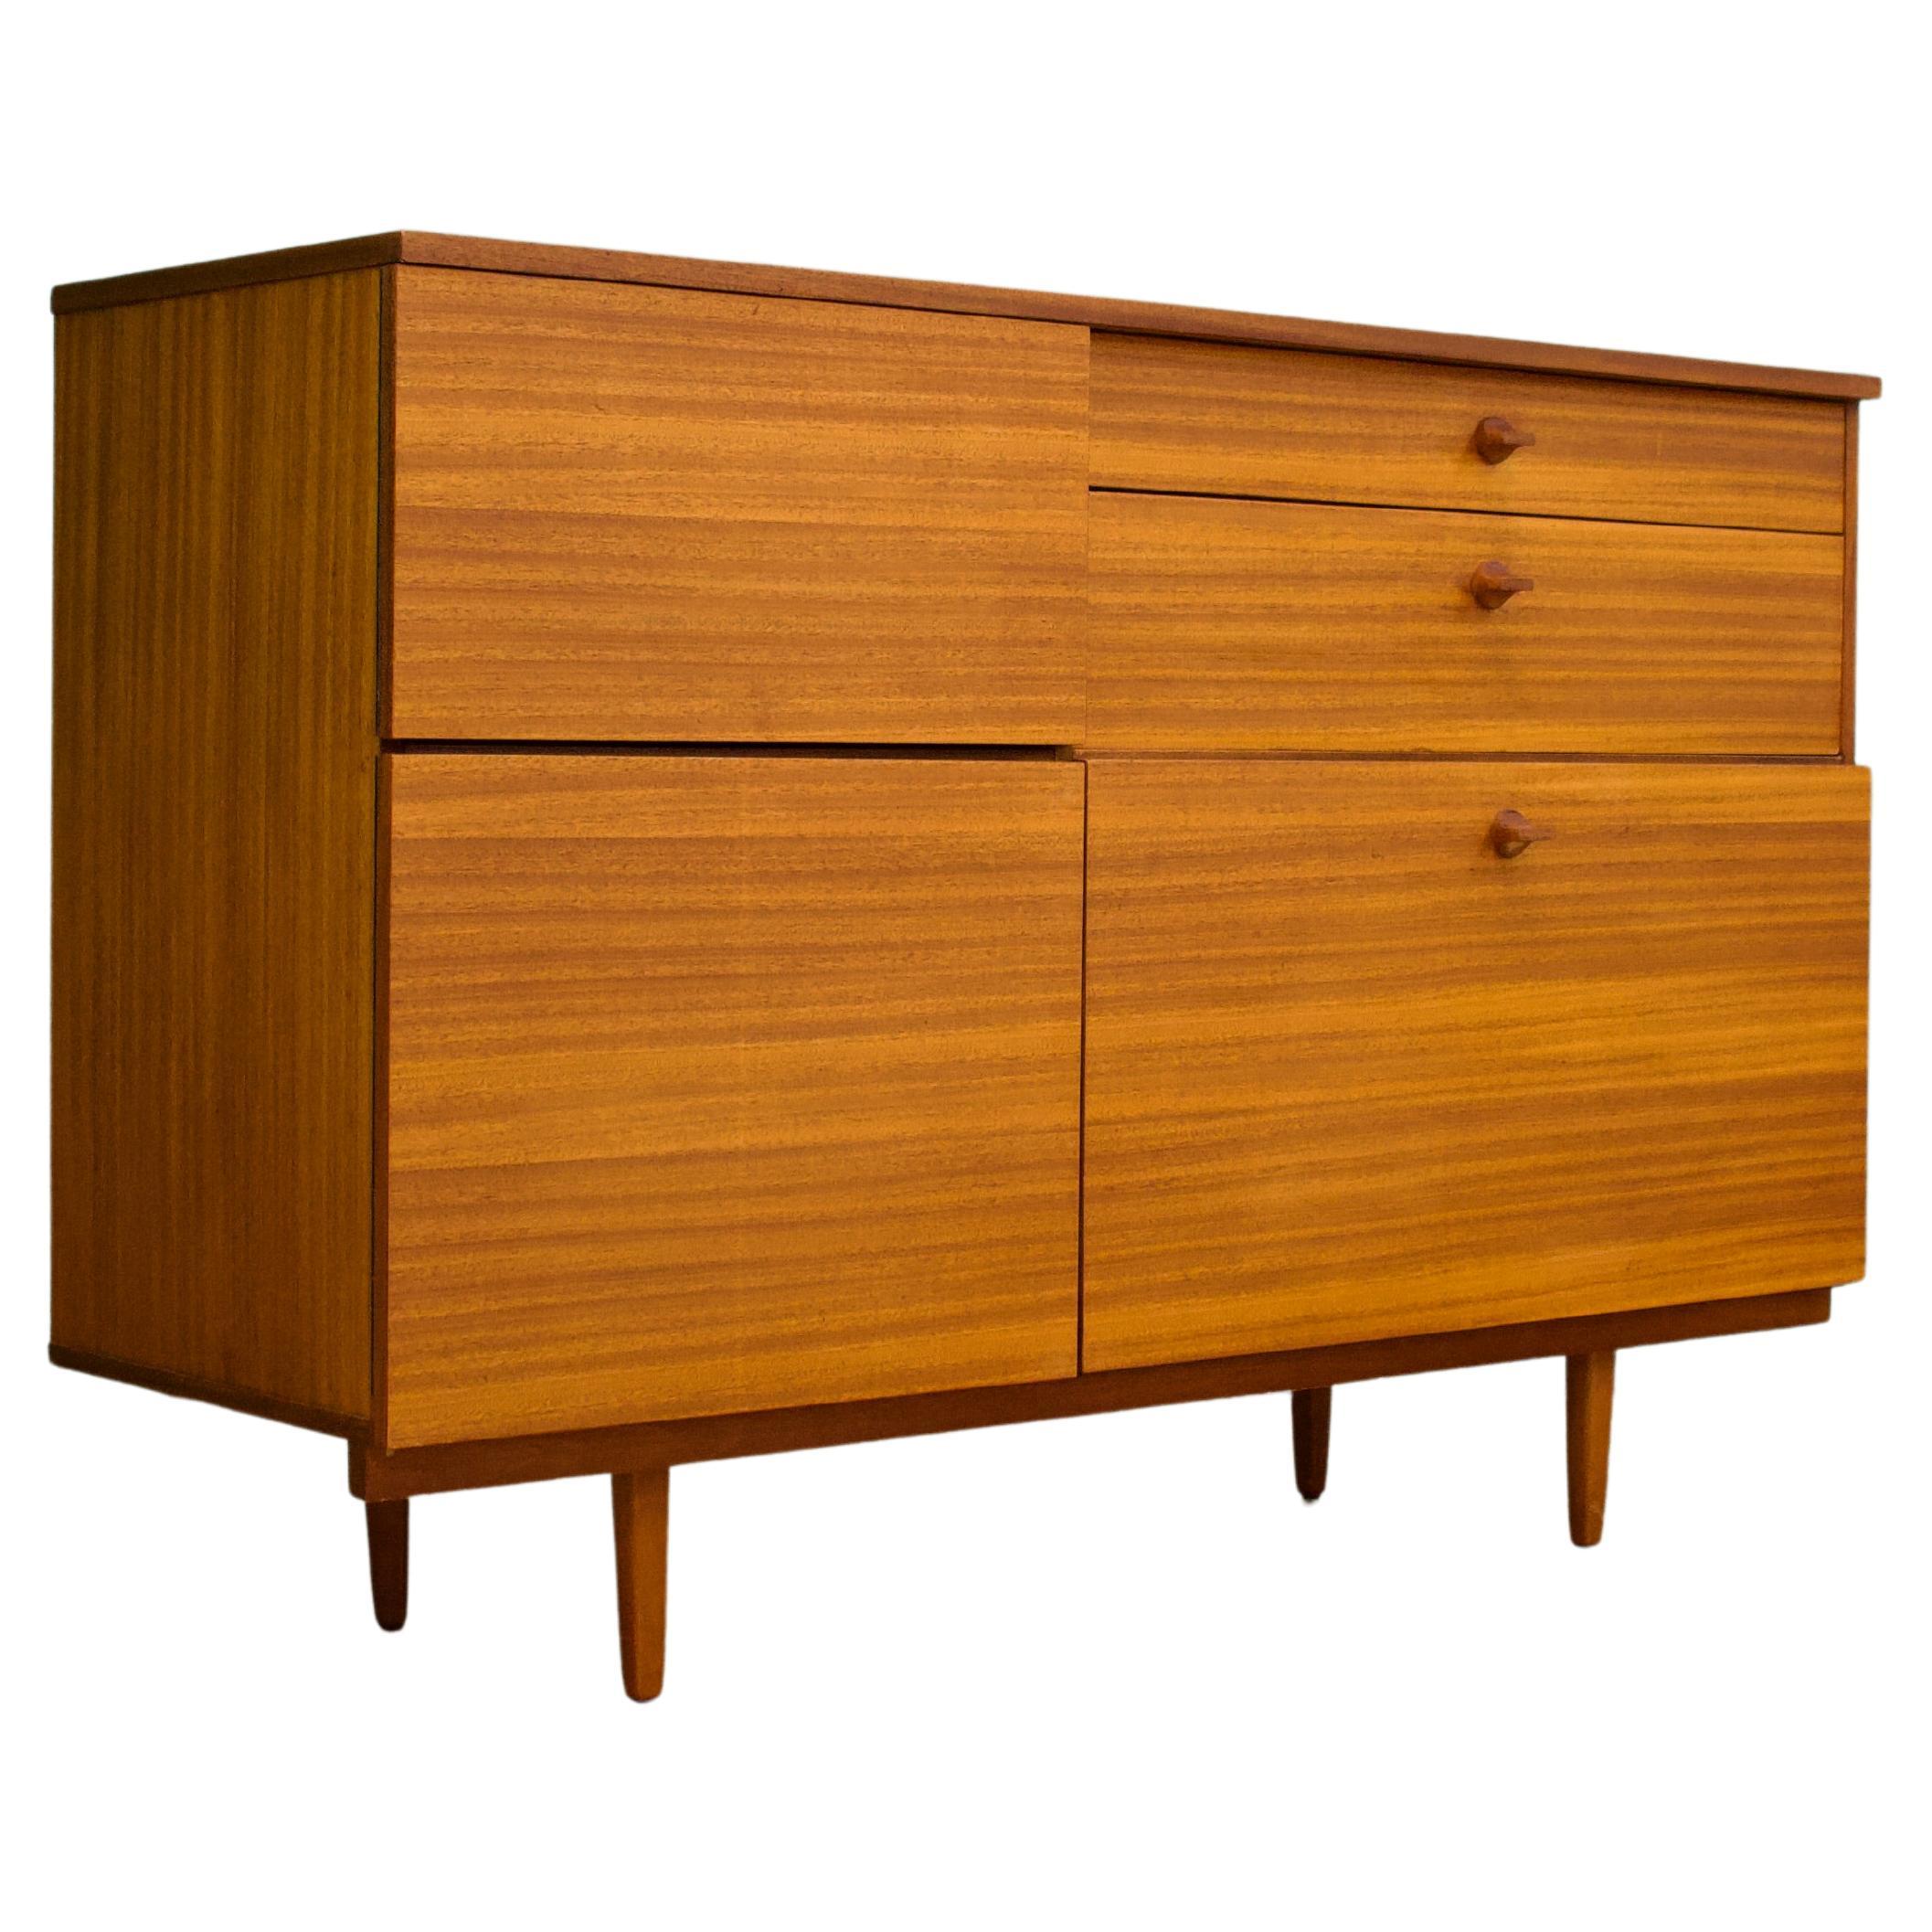 Teak Sideboard or Drinks Cabinet from Avalon, 1960s